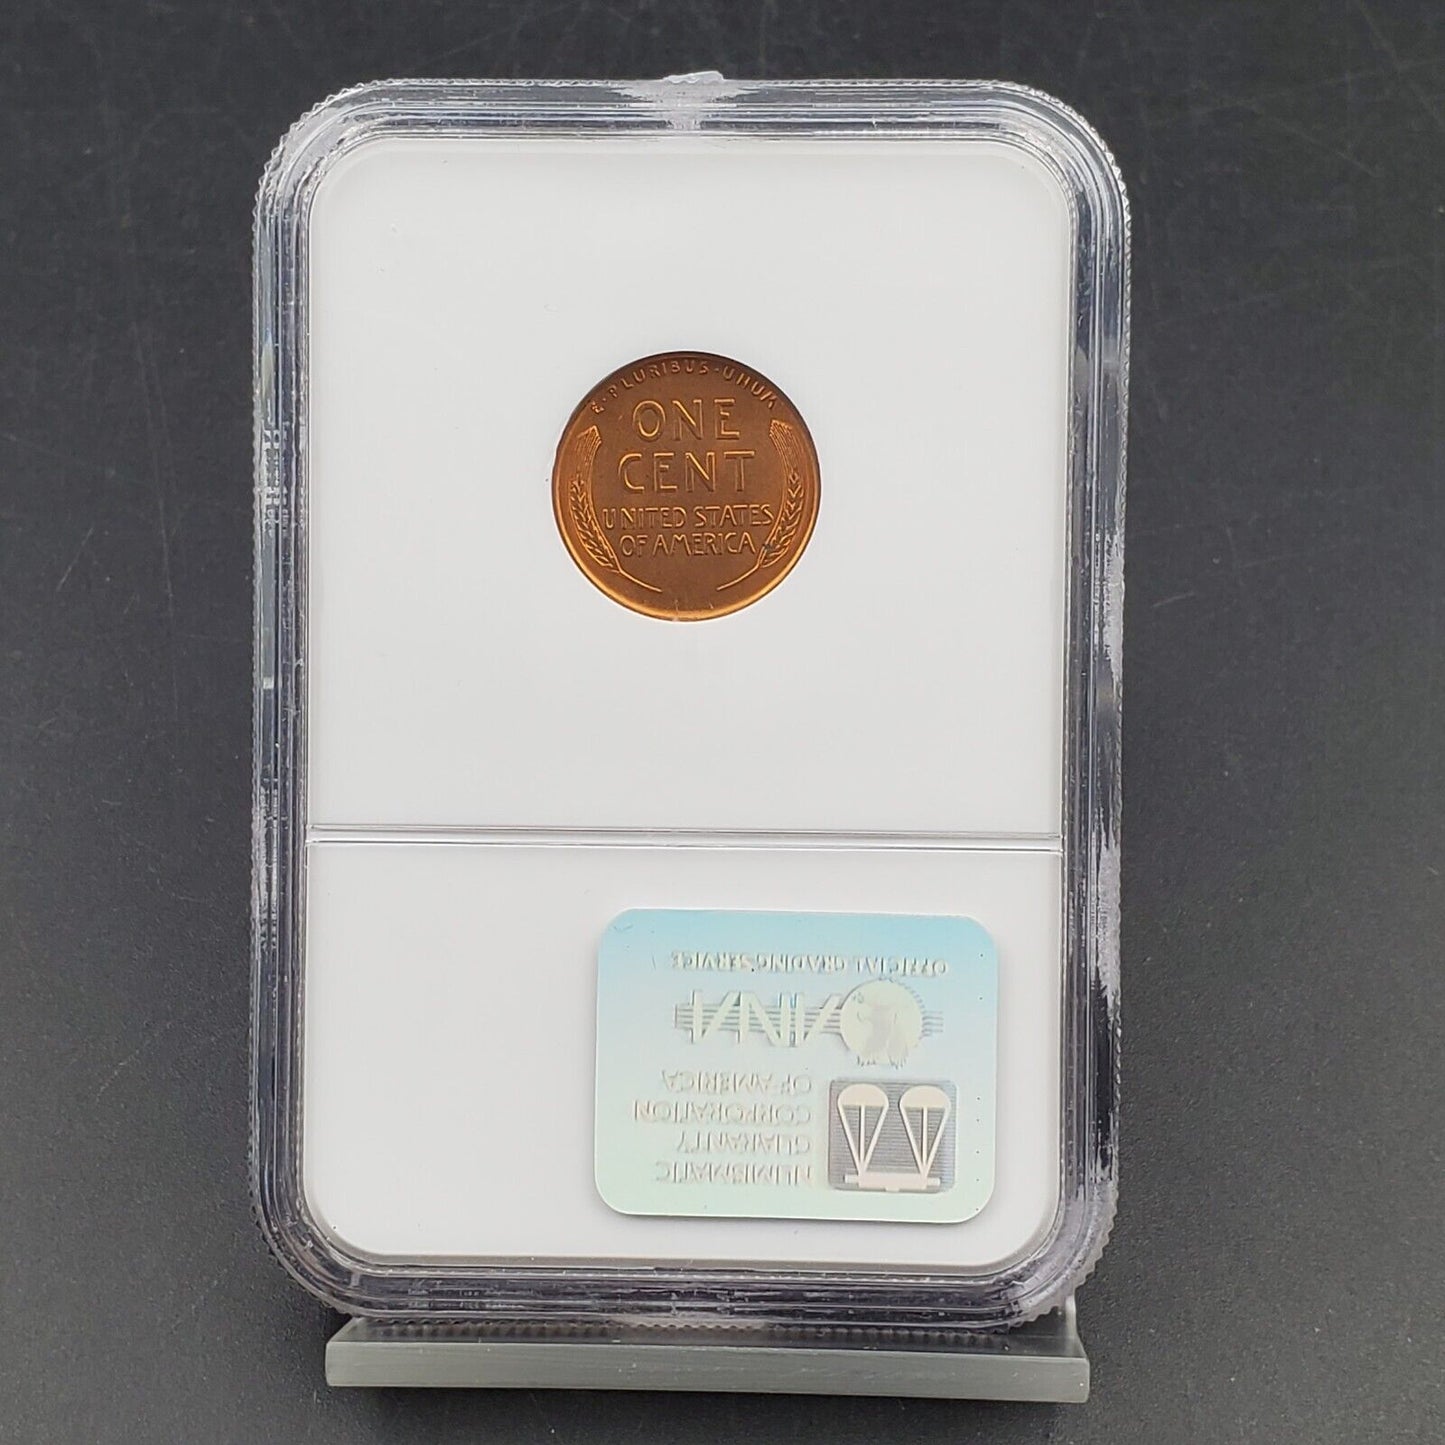 1941 S Lincoln Wheat Cent Penny Coin NGC MS66 RD RED #2